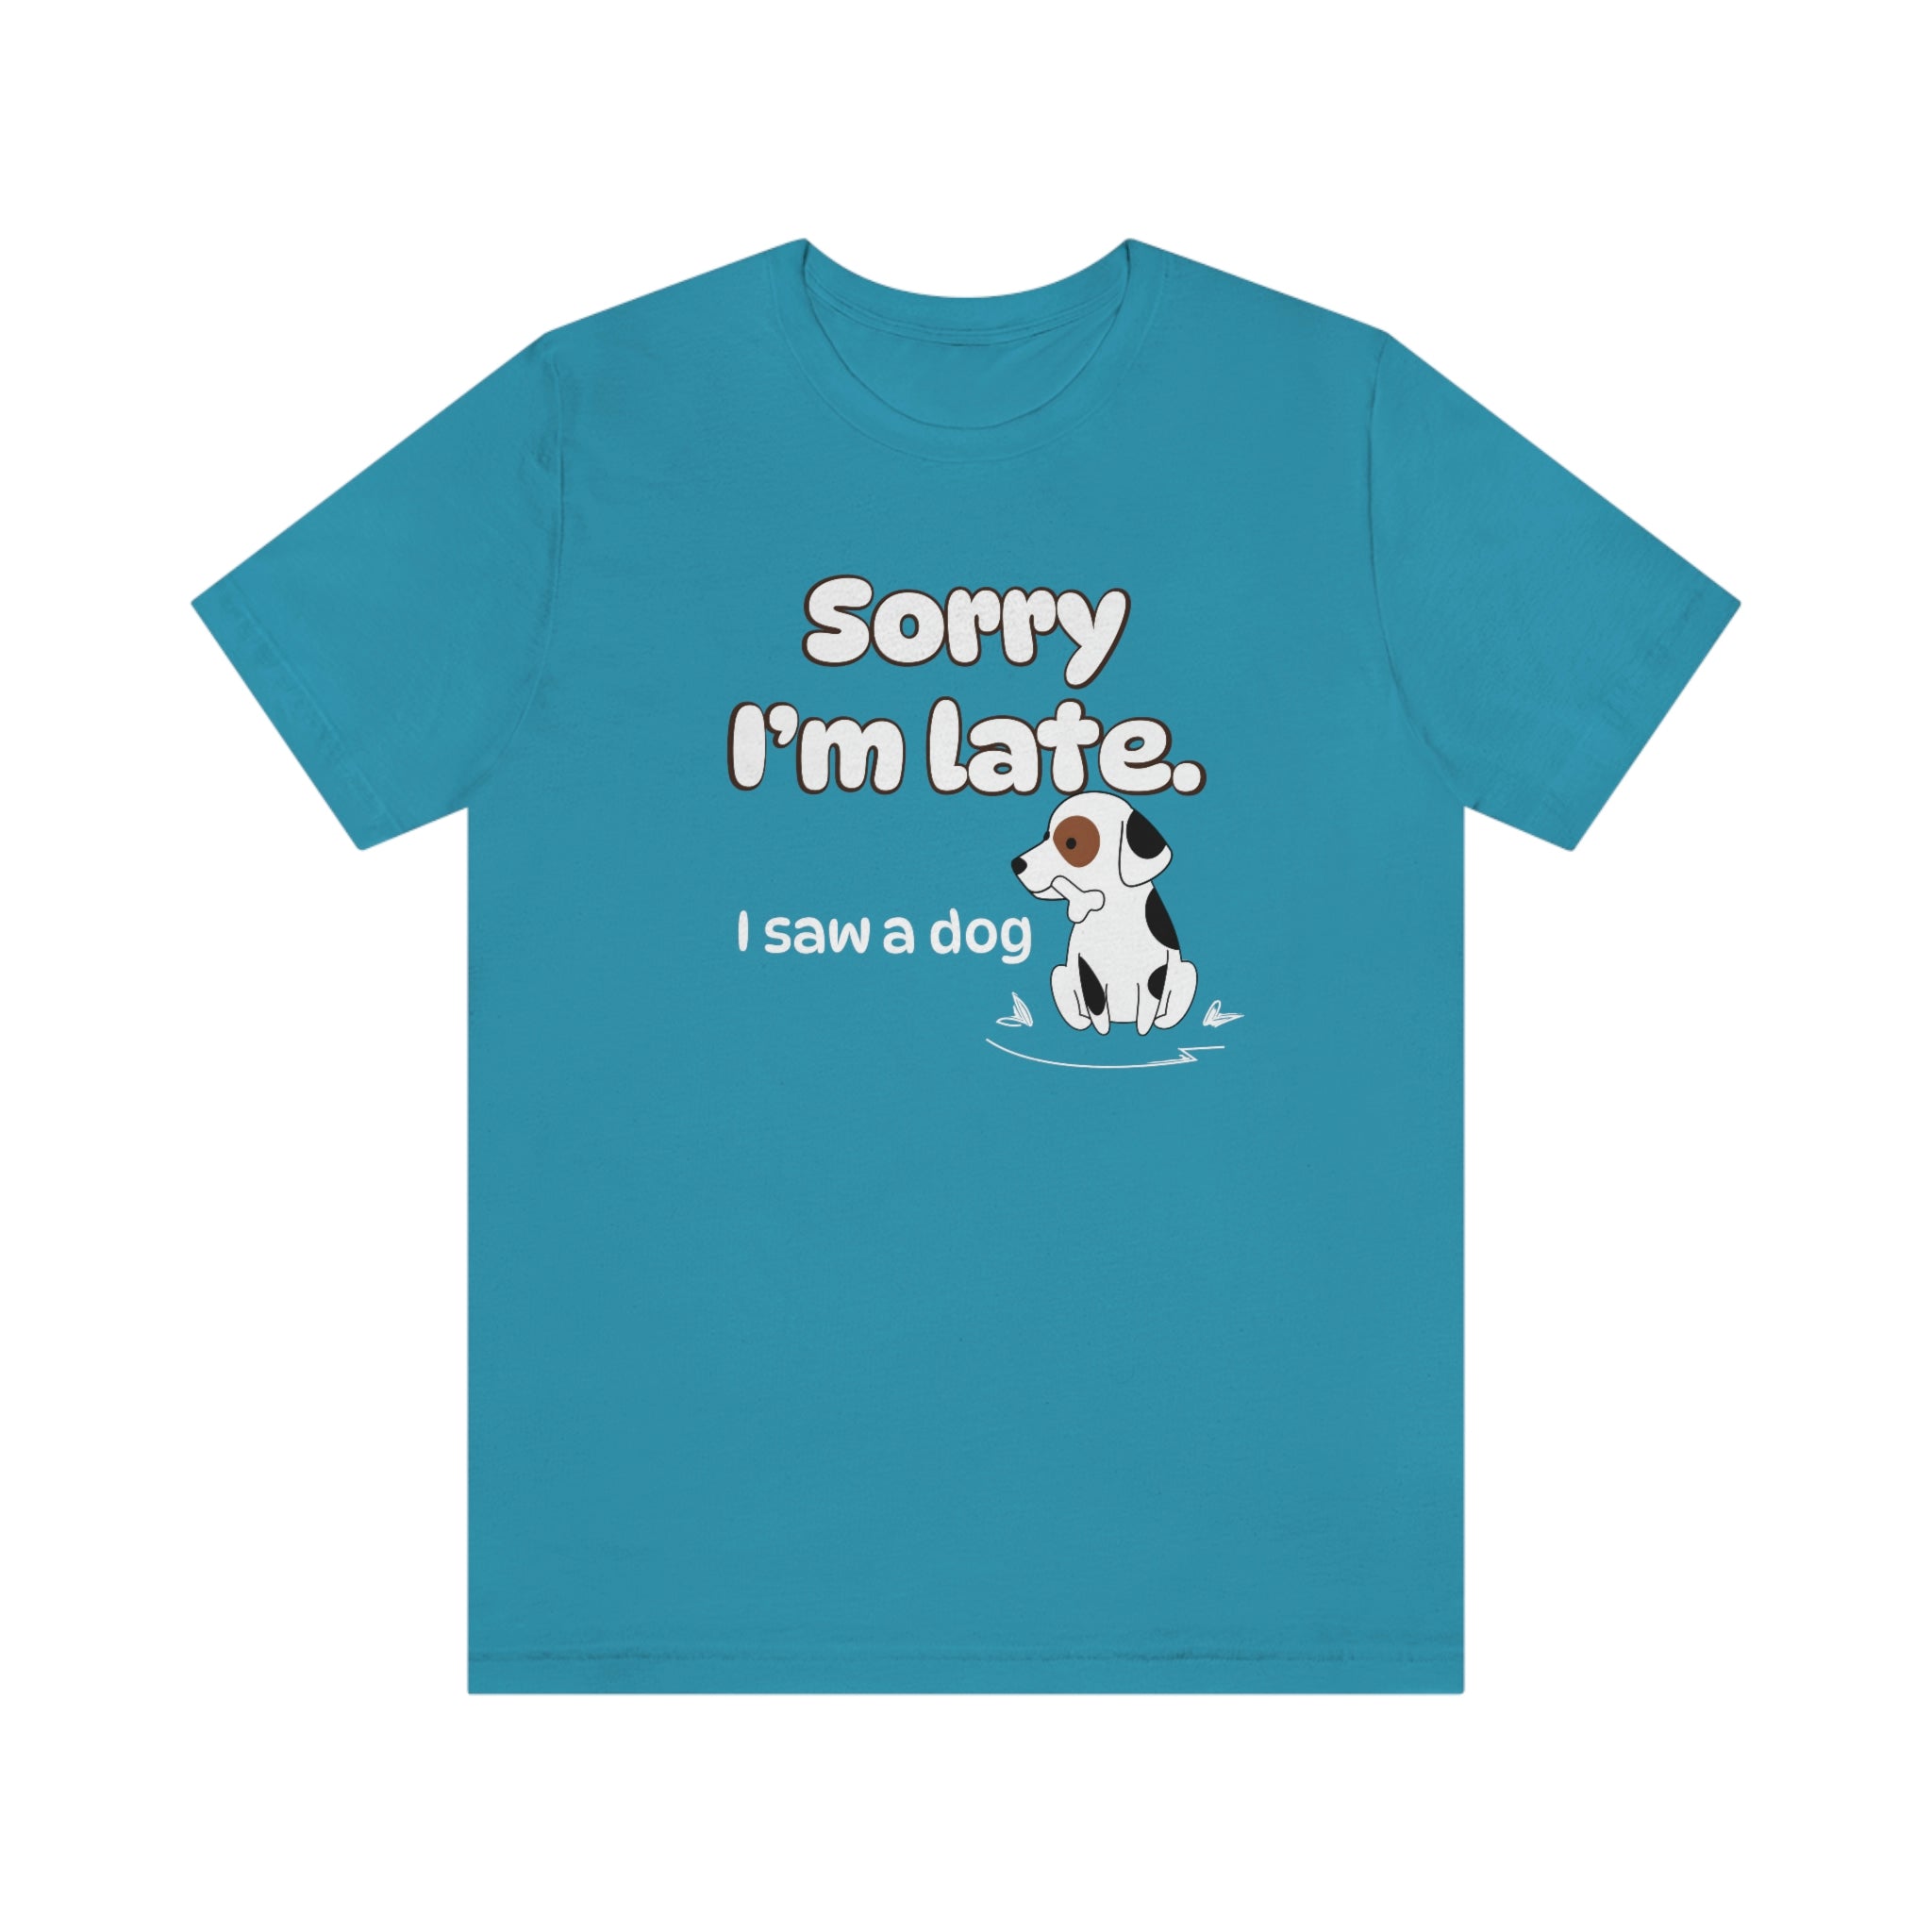 Sorry I'm late - I Saw a Dog : Unisex 100% Comfy Cotton T-Shirt by Bella+Canvas